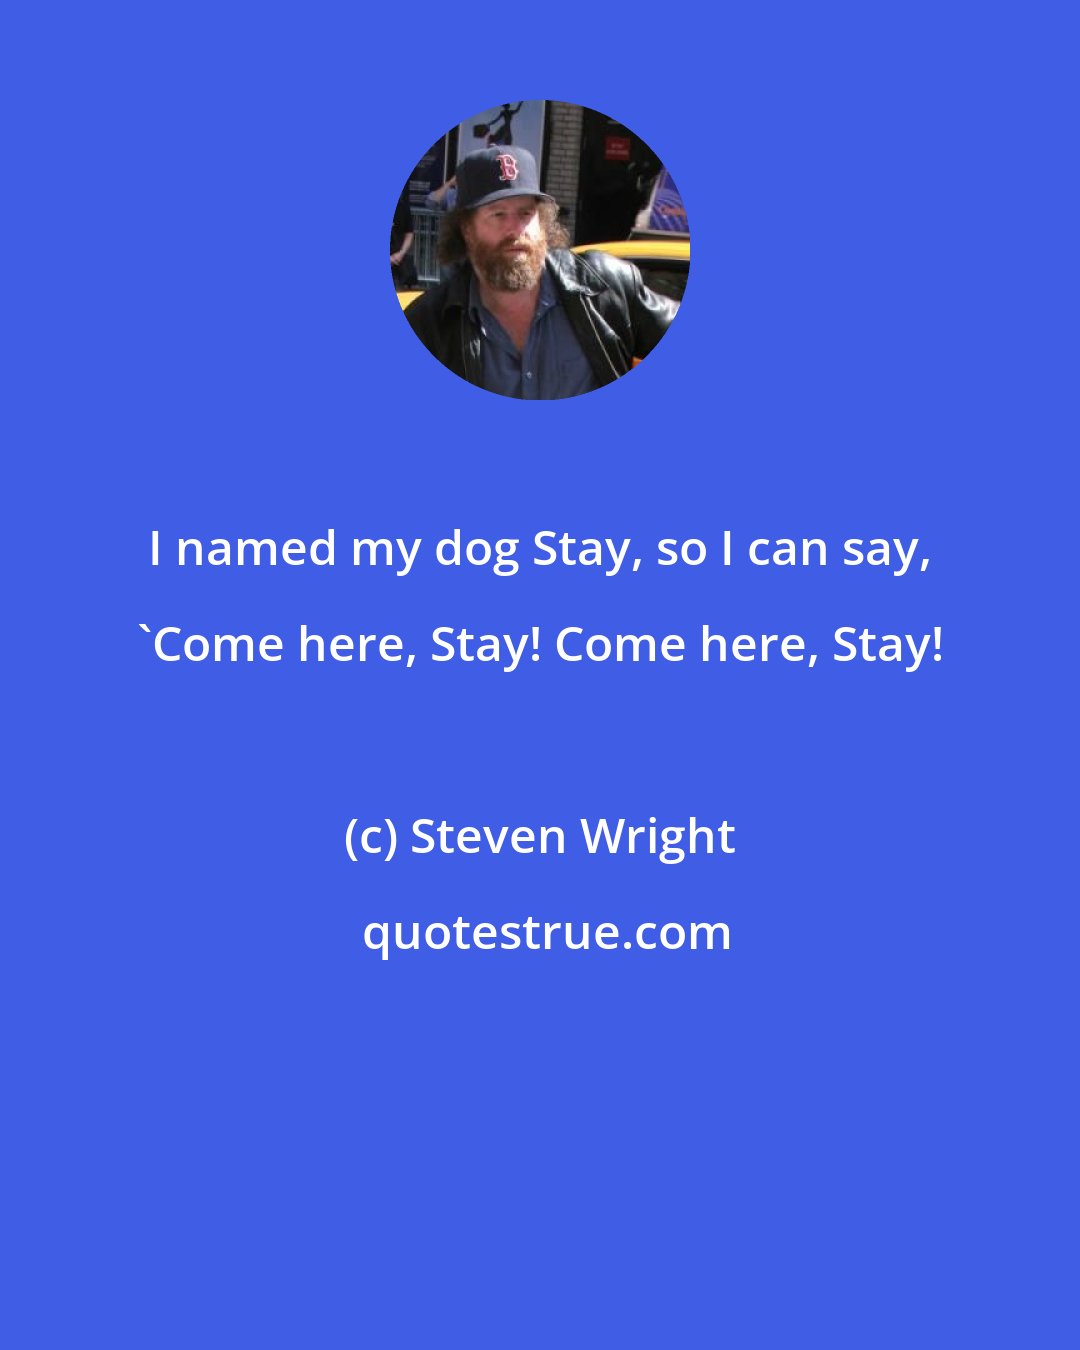 Steven Wright: I named my dog Stay, so I can say, 'Come here, Stay! Come here, Stay!